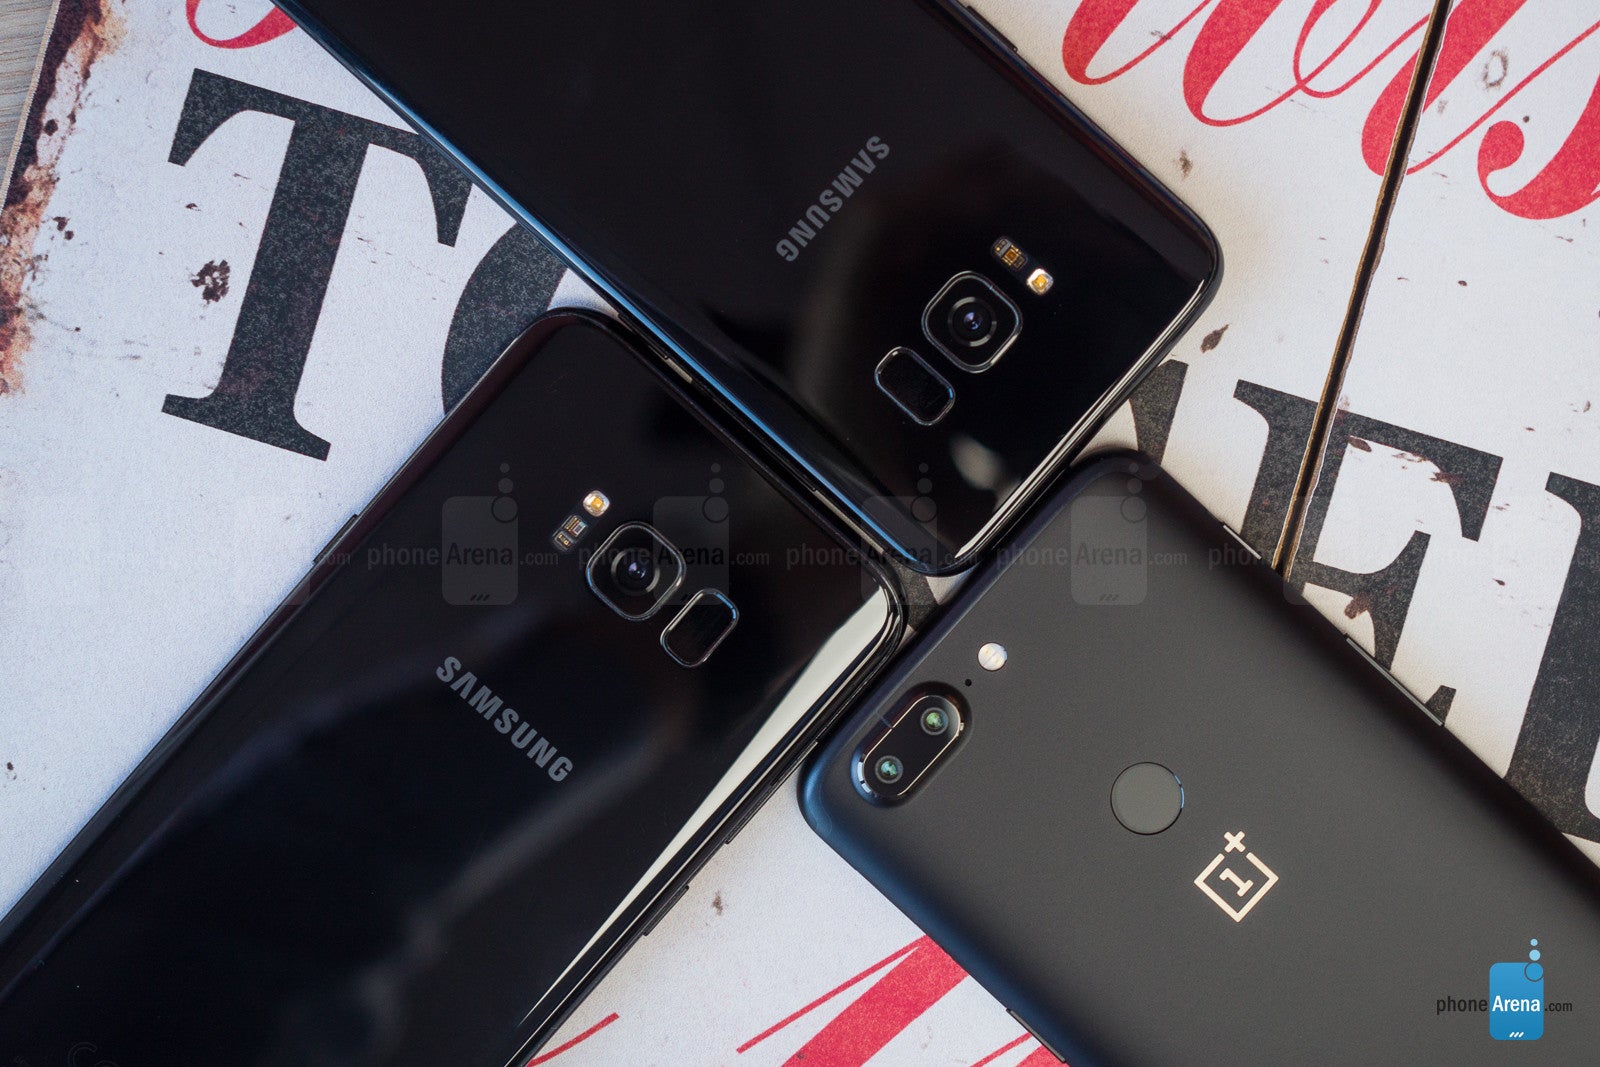 OnePlus 5T vs Samsung Galaxy S8 and Galaxy S8+